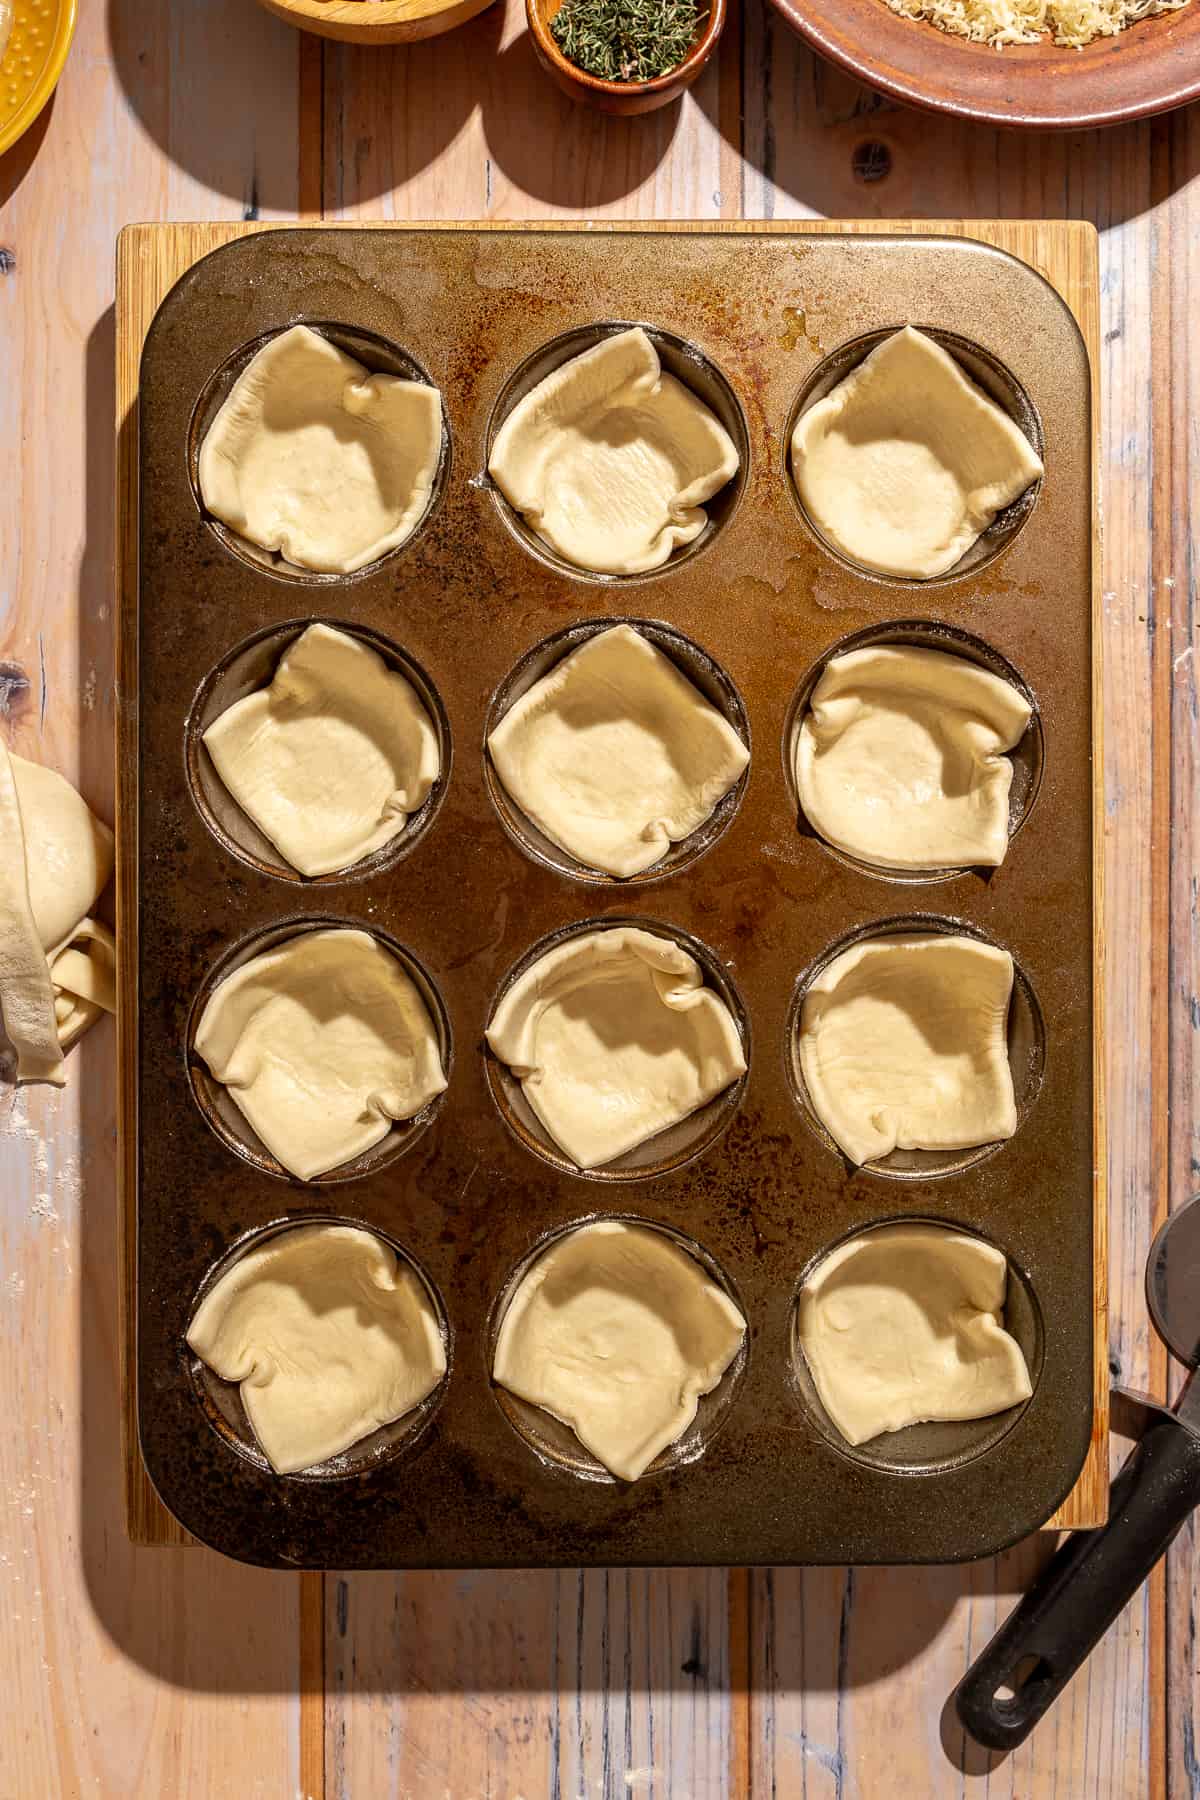 Cut pastry placed into each muffin pan opening.